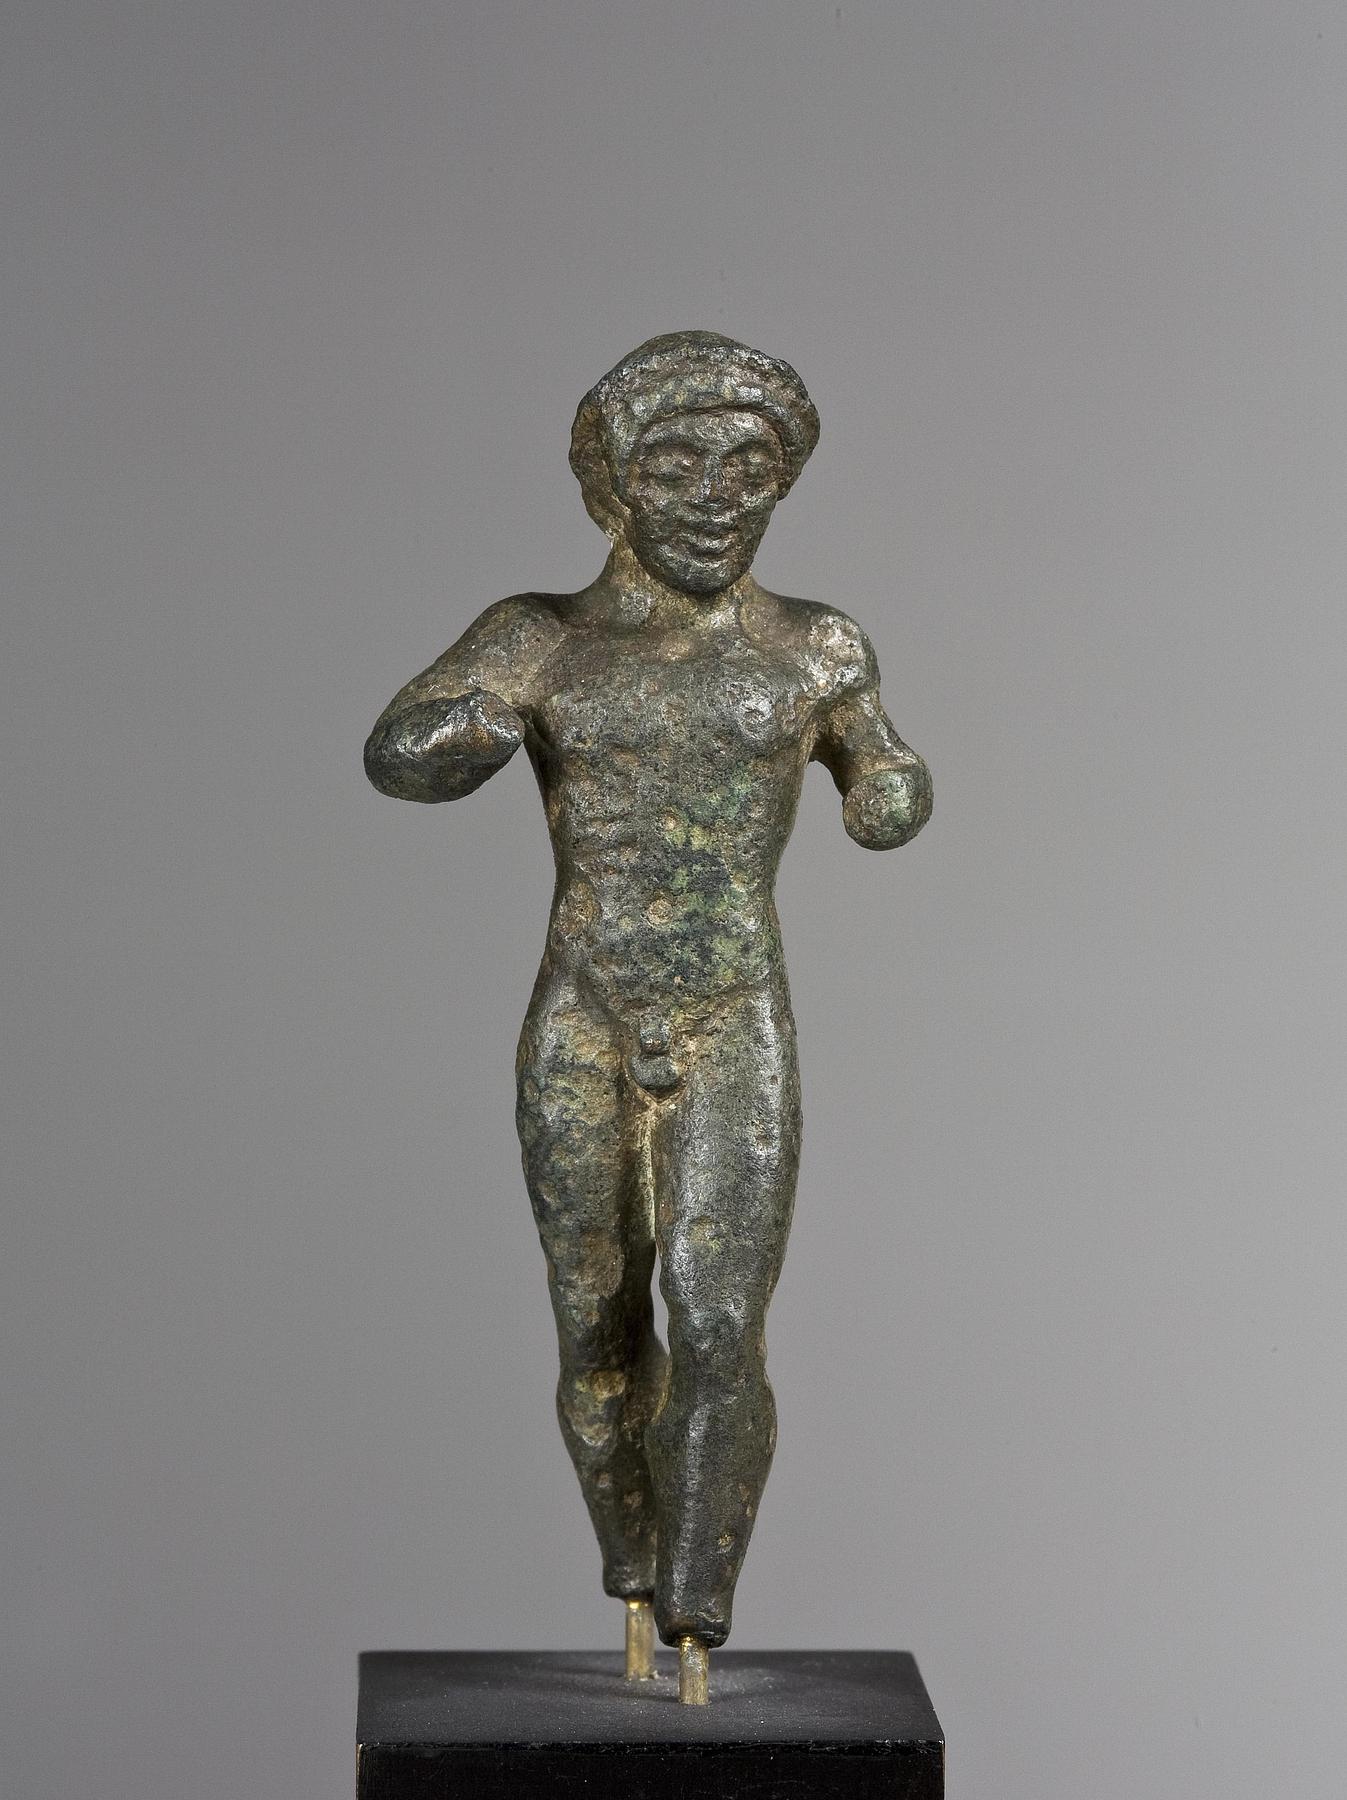 Statuette of an athlete, H2015